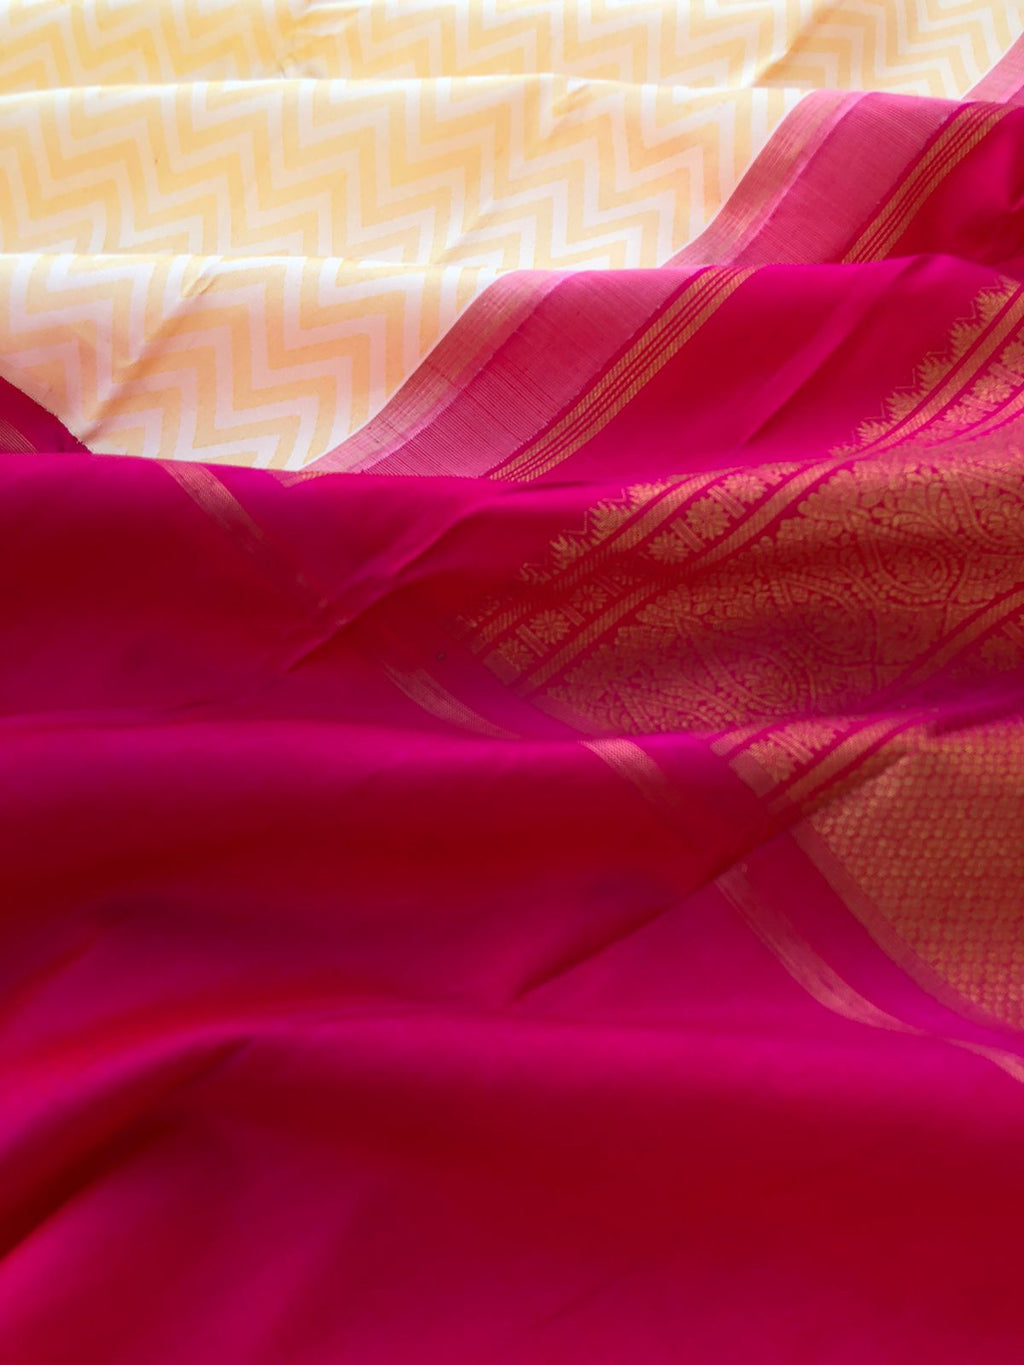 Leela - Legacy Of Kanchivarams - butterscotch cream chevron V pattern weave woven body with deep Indian pink broad woven borders